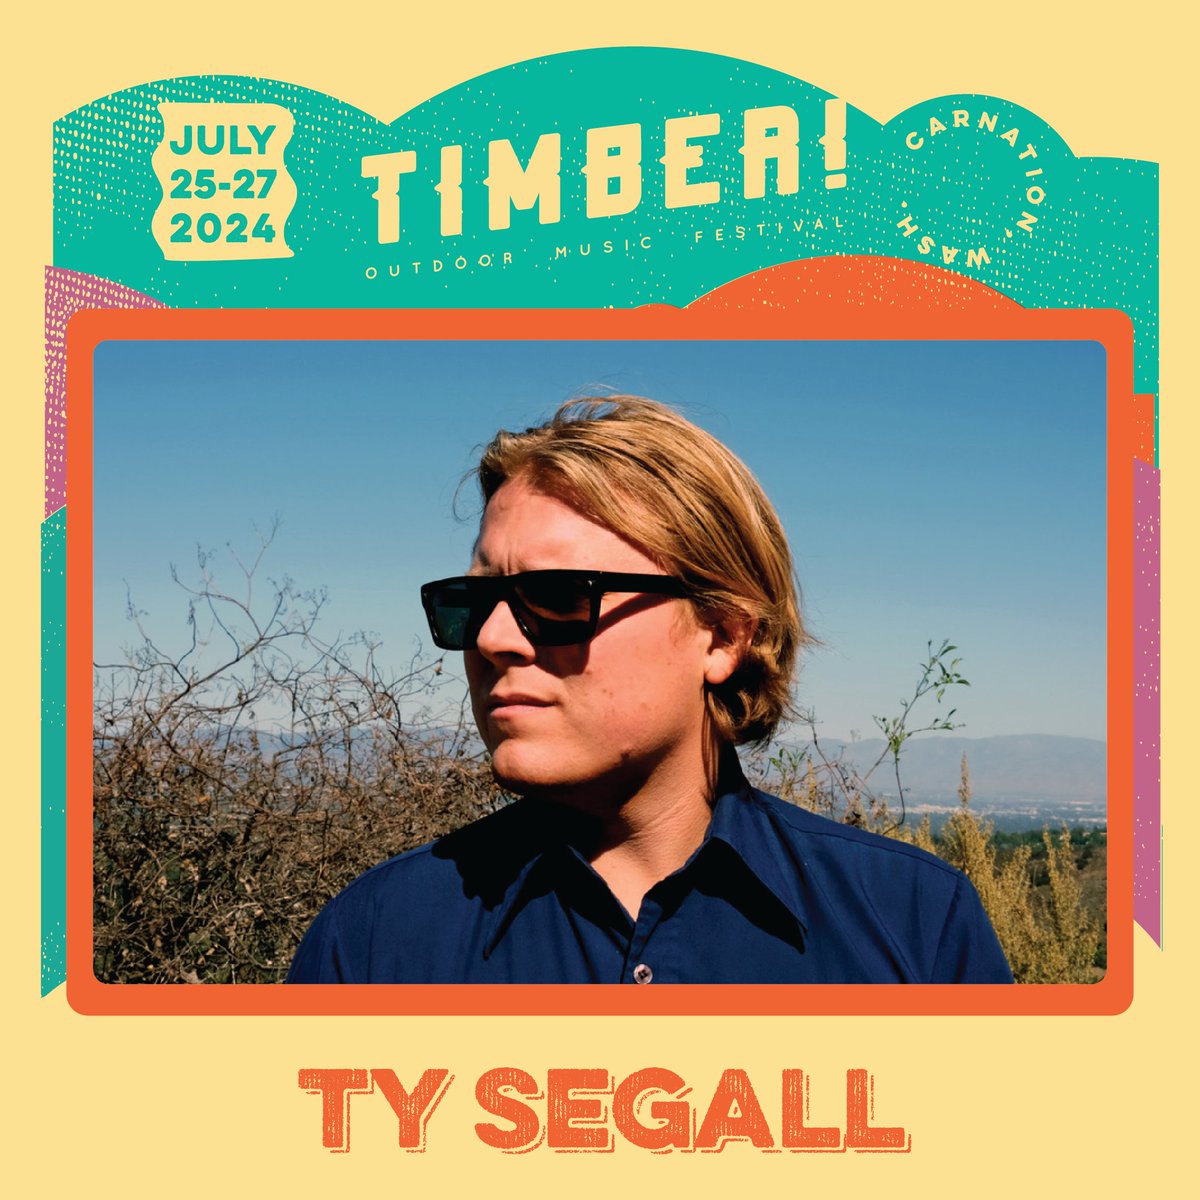 .@tysegall is bringing the heat to Timber! 2024. Catch him headlining the main stage on Saturday, July 27. 💥 Get your tickets at bit.ly/timberfesttix.